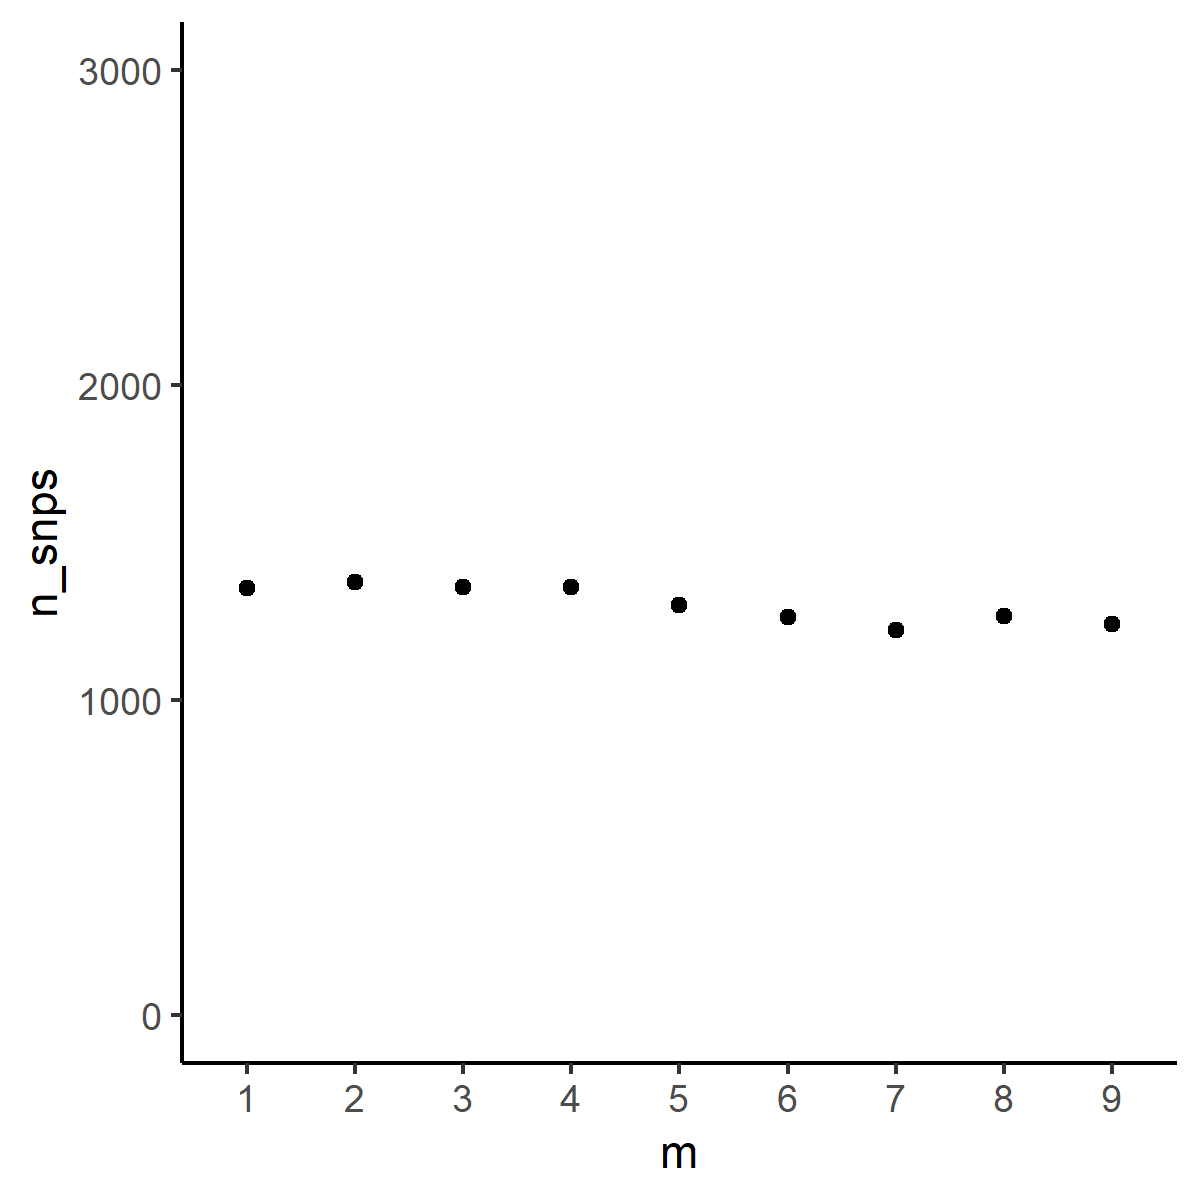 Scatterplot of parameter and total SNP count